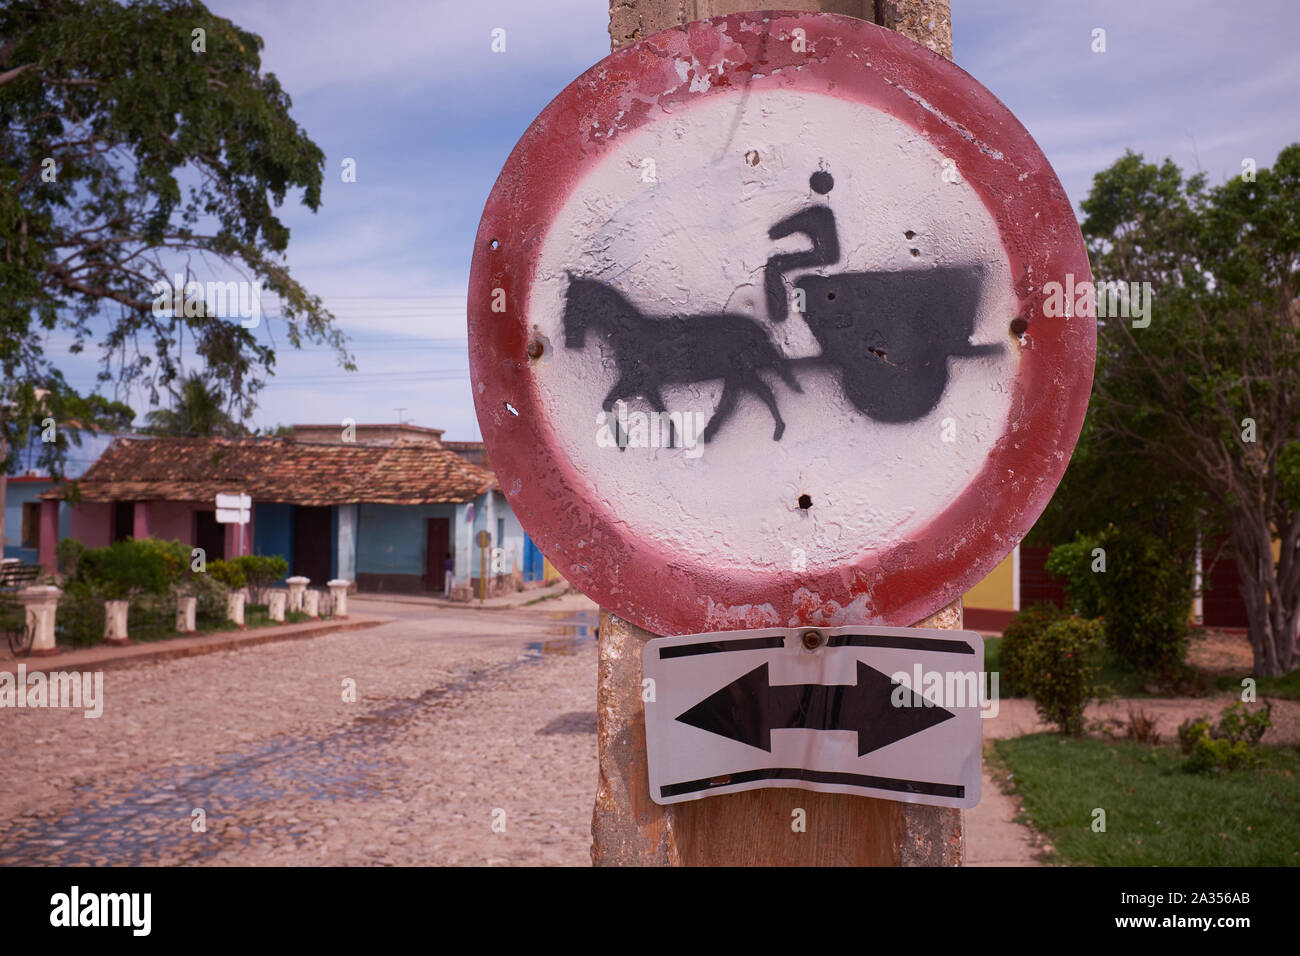 Homemade horse and cart street sign in Trinidad, Cuba Stock Photo